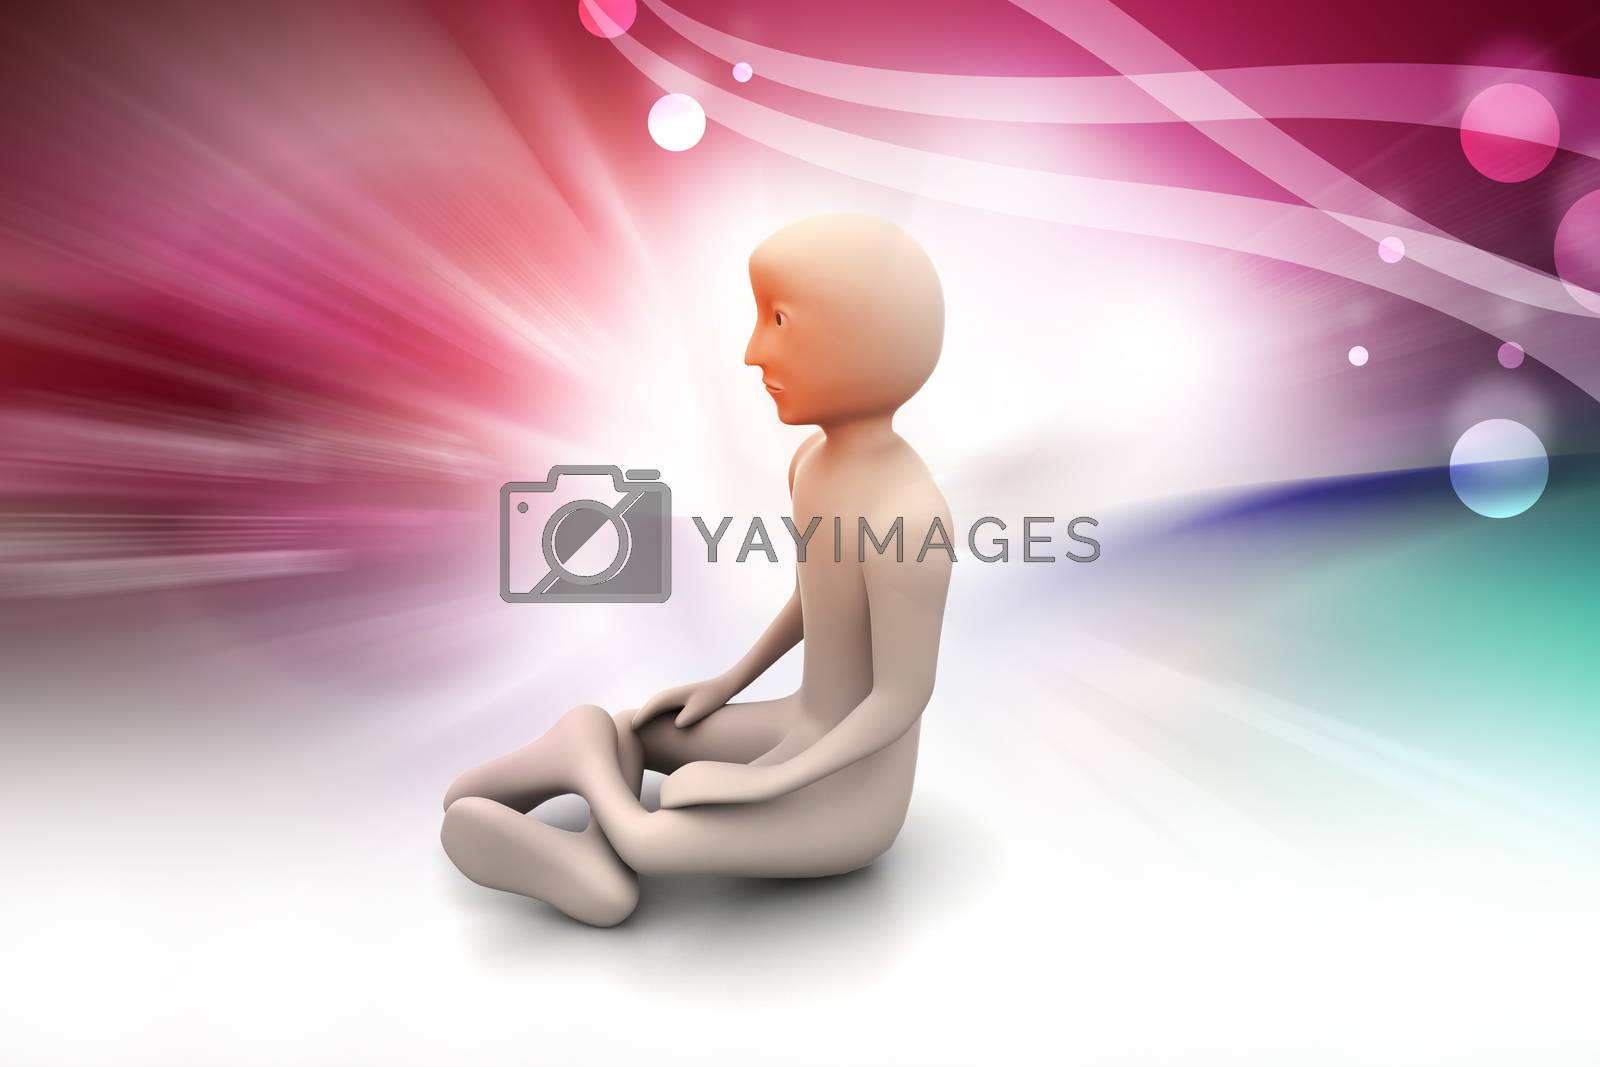 Royalty free image of 3d man in meditation   by rbhavana